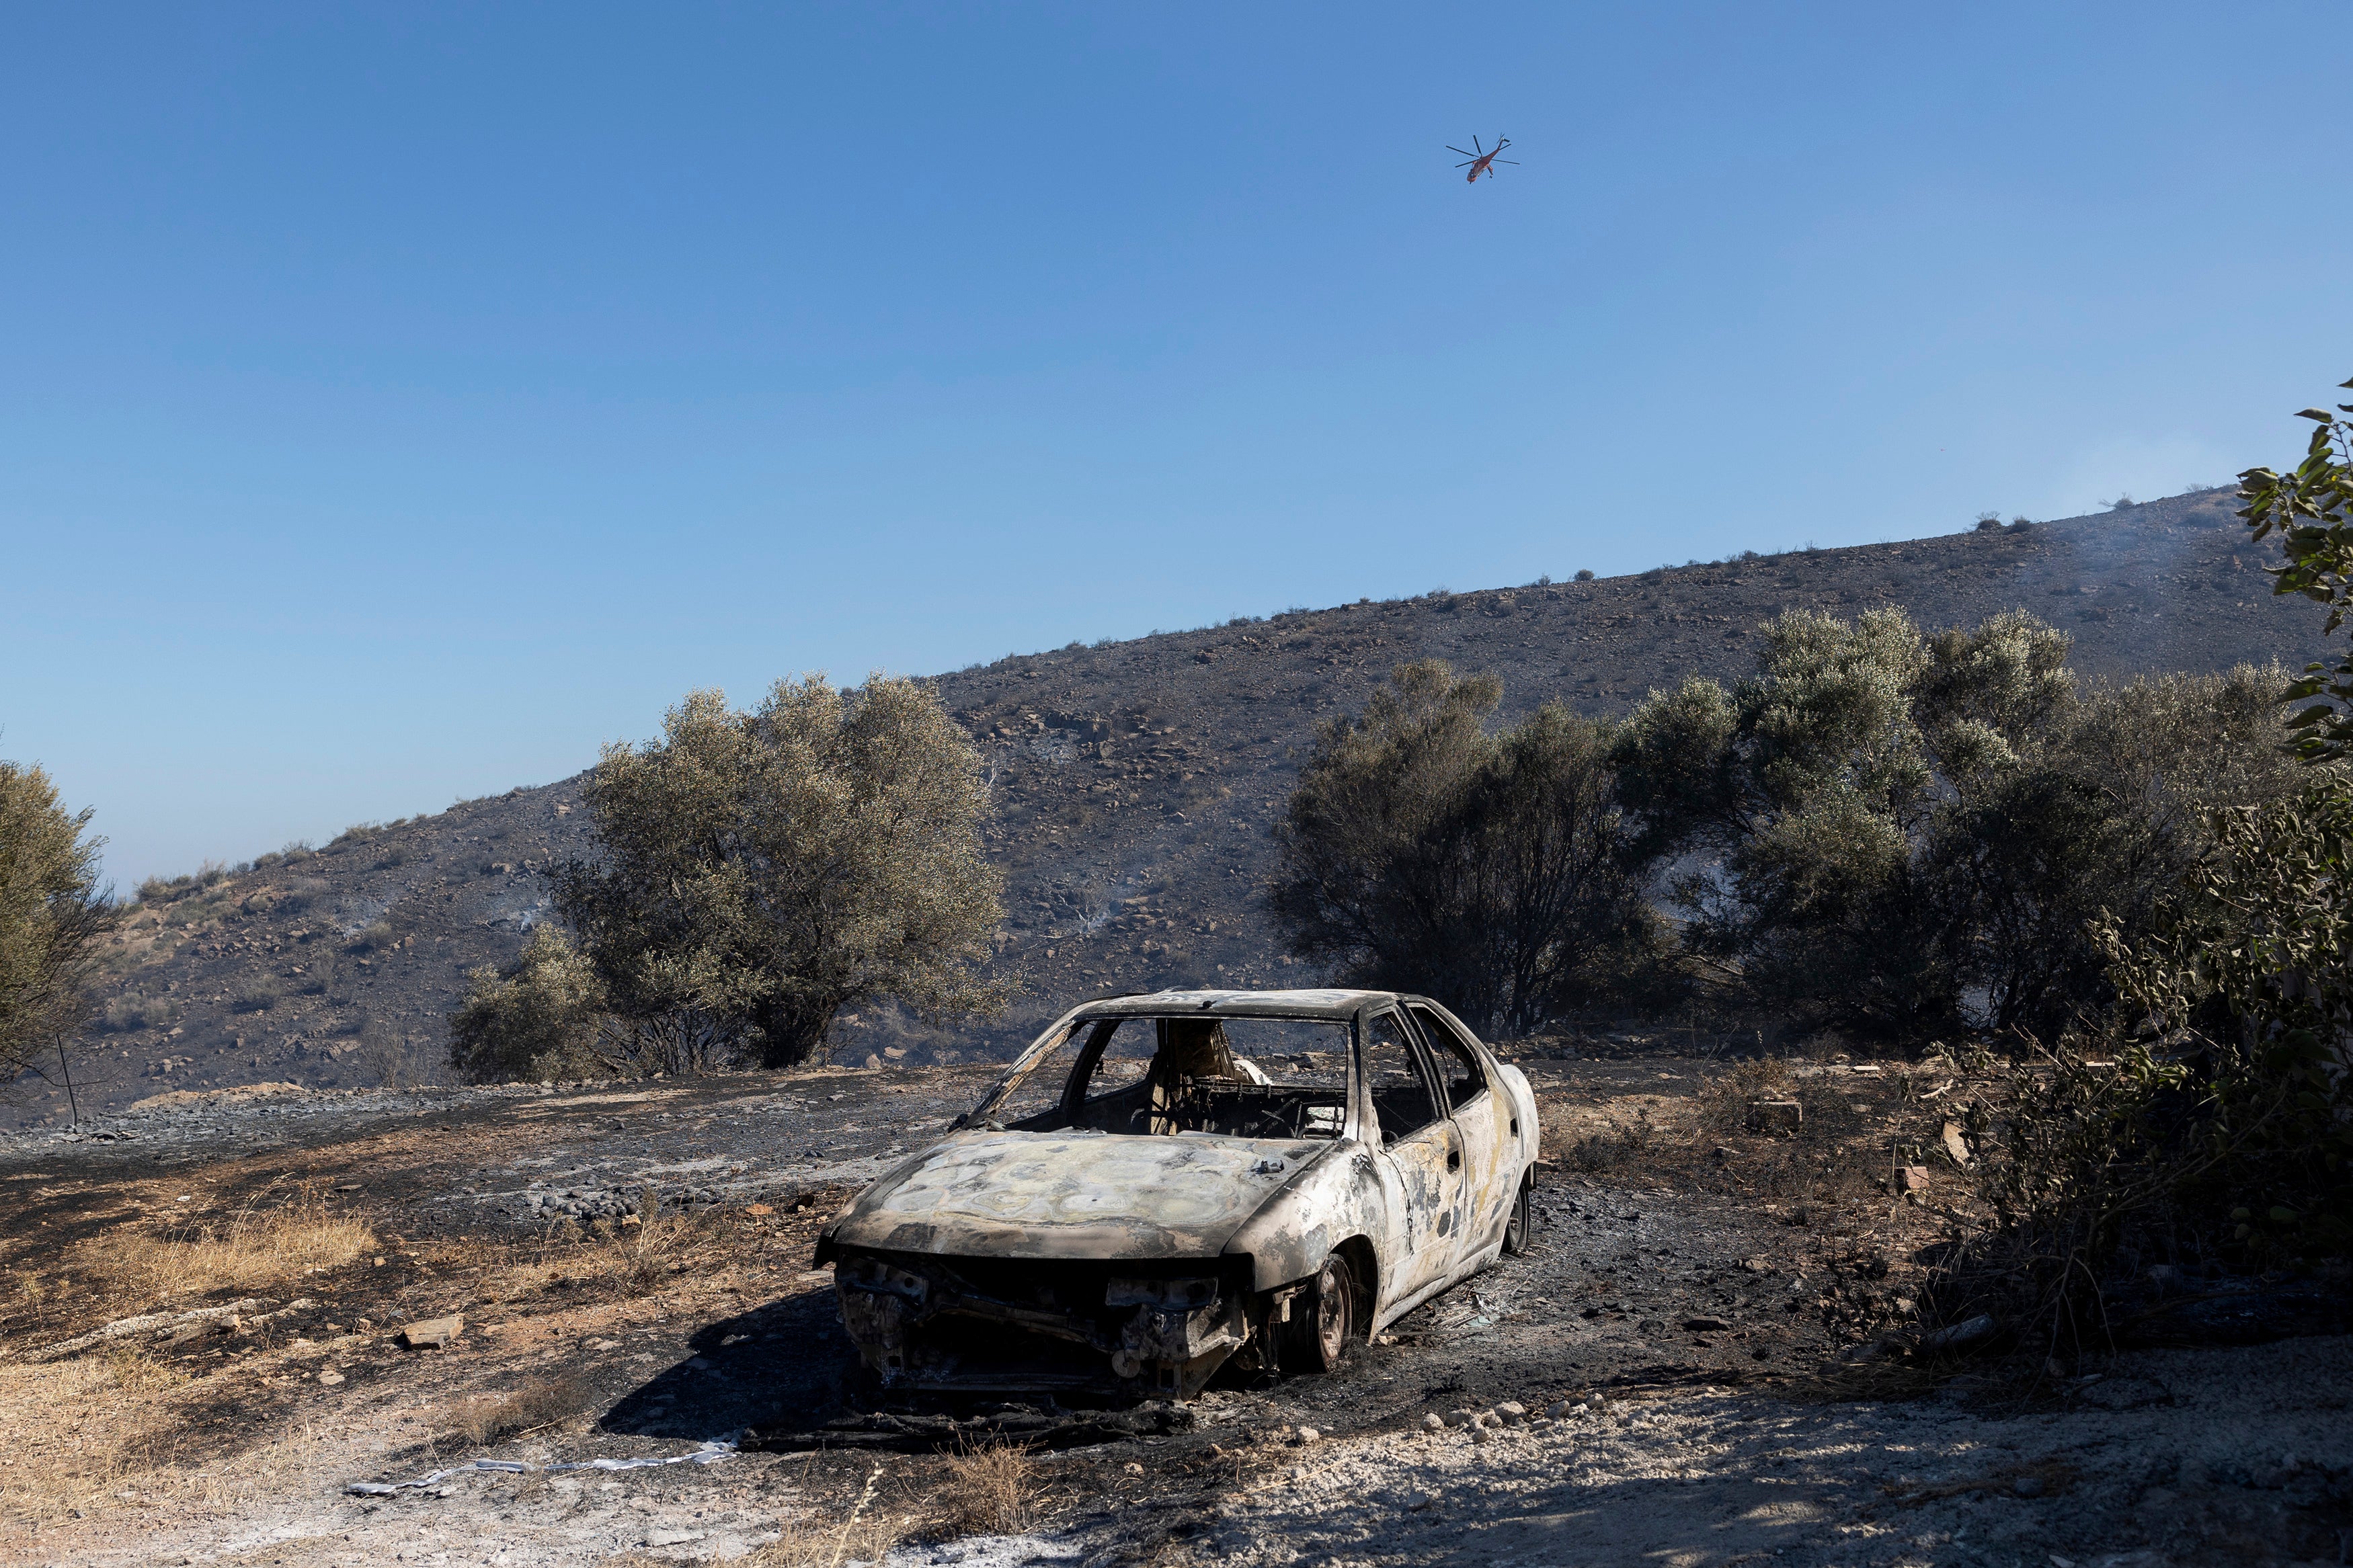 A burnt car after a wildfire